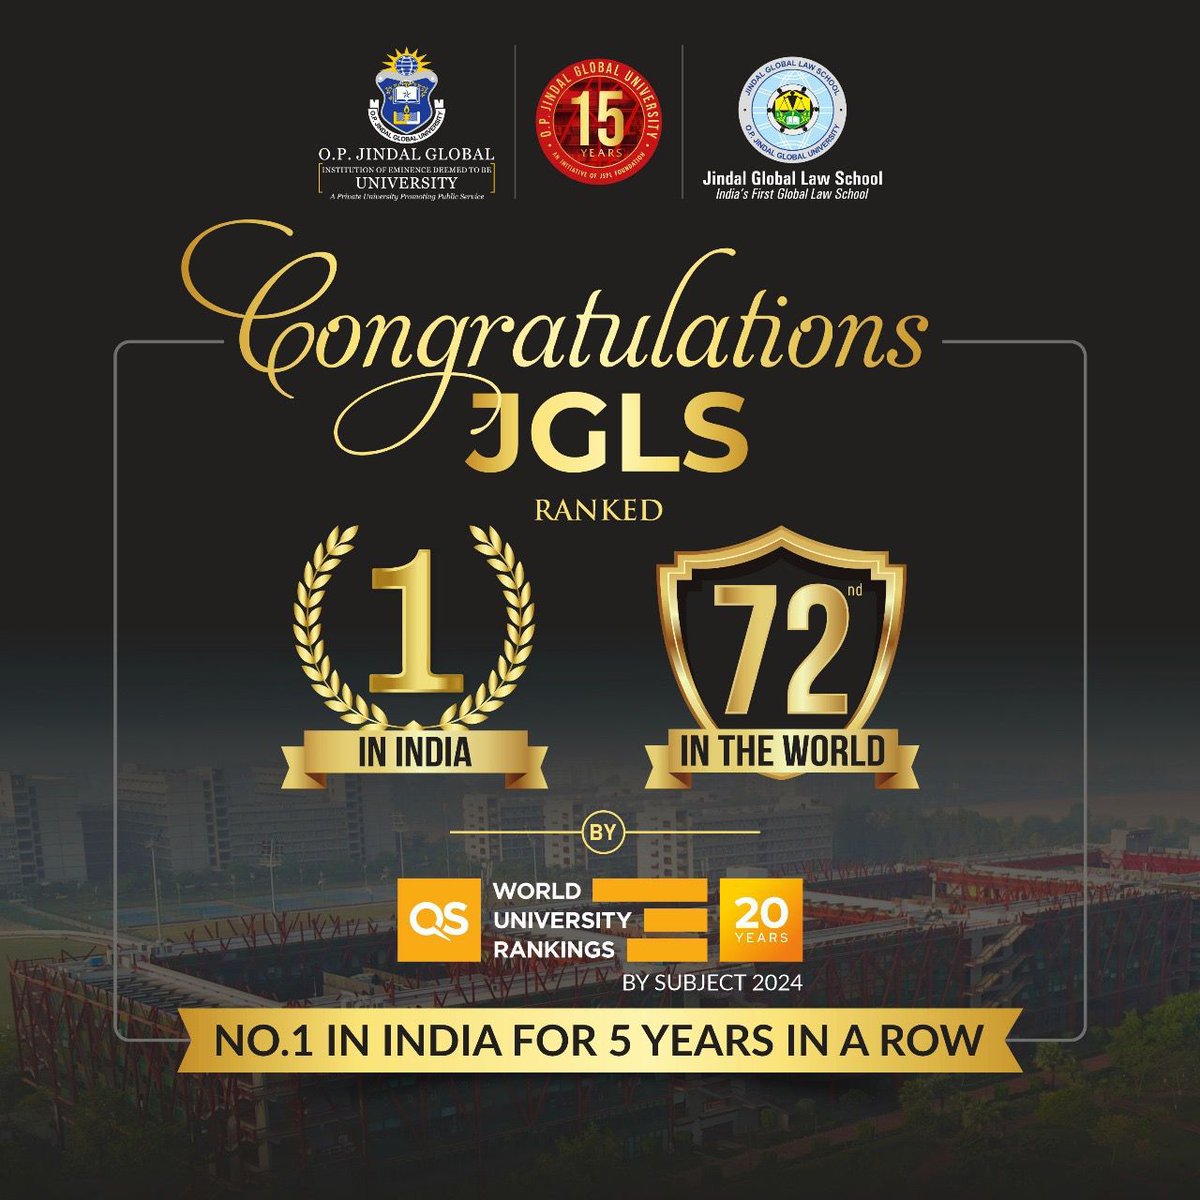 Jindal Global Law School is a shining star with its consistent Number 1 position as India's leading law school. #JindalGlobalLawSchoolNo1